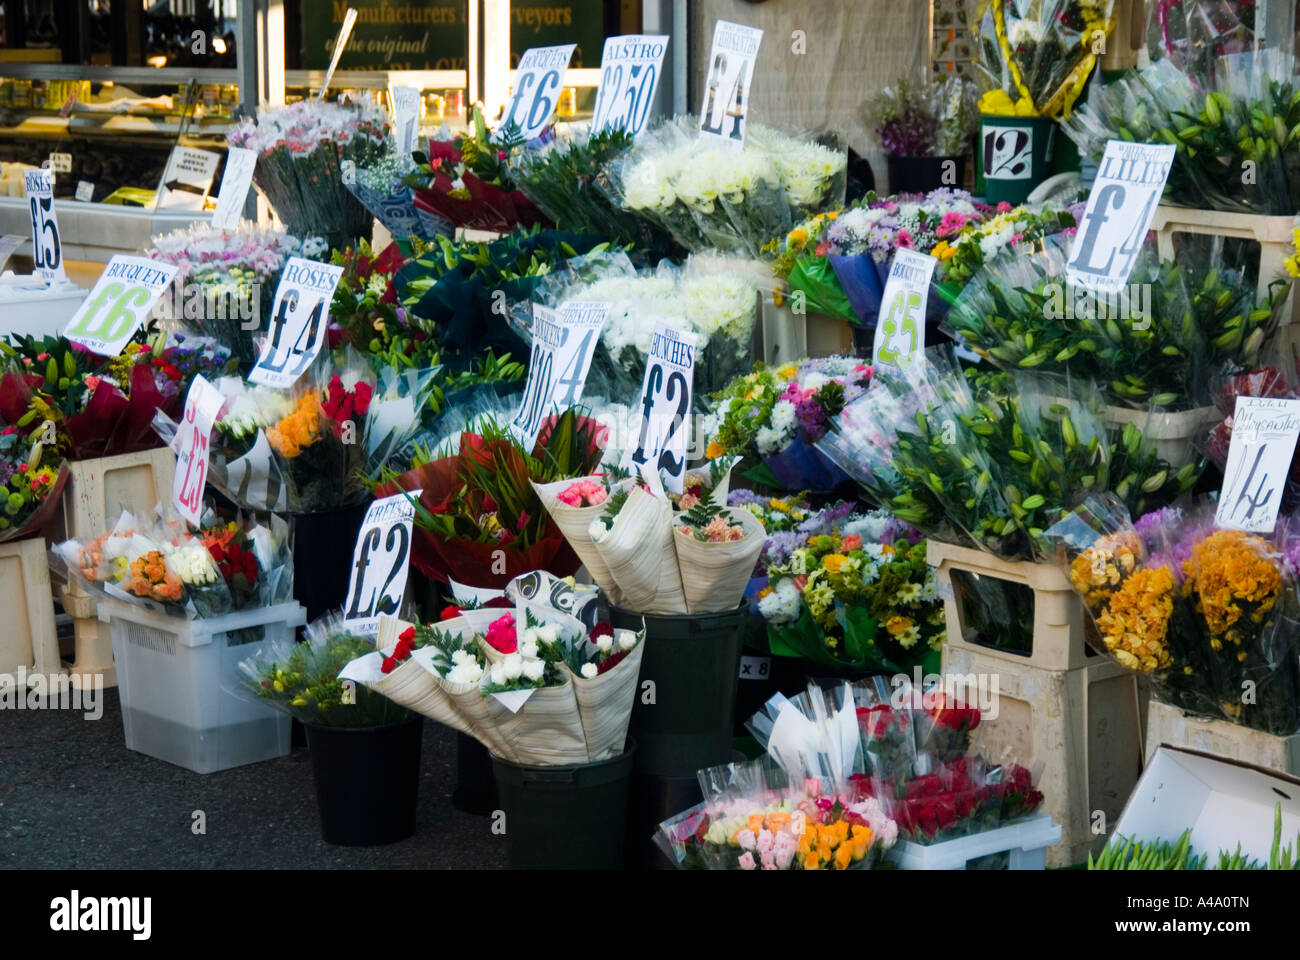 Flowers Outside a florist shop with price tags Bury Manchester UK Stock Photo